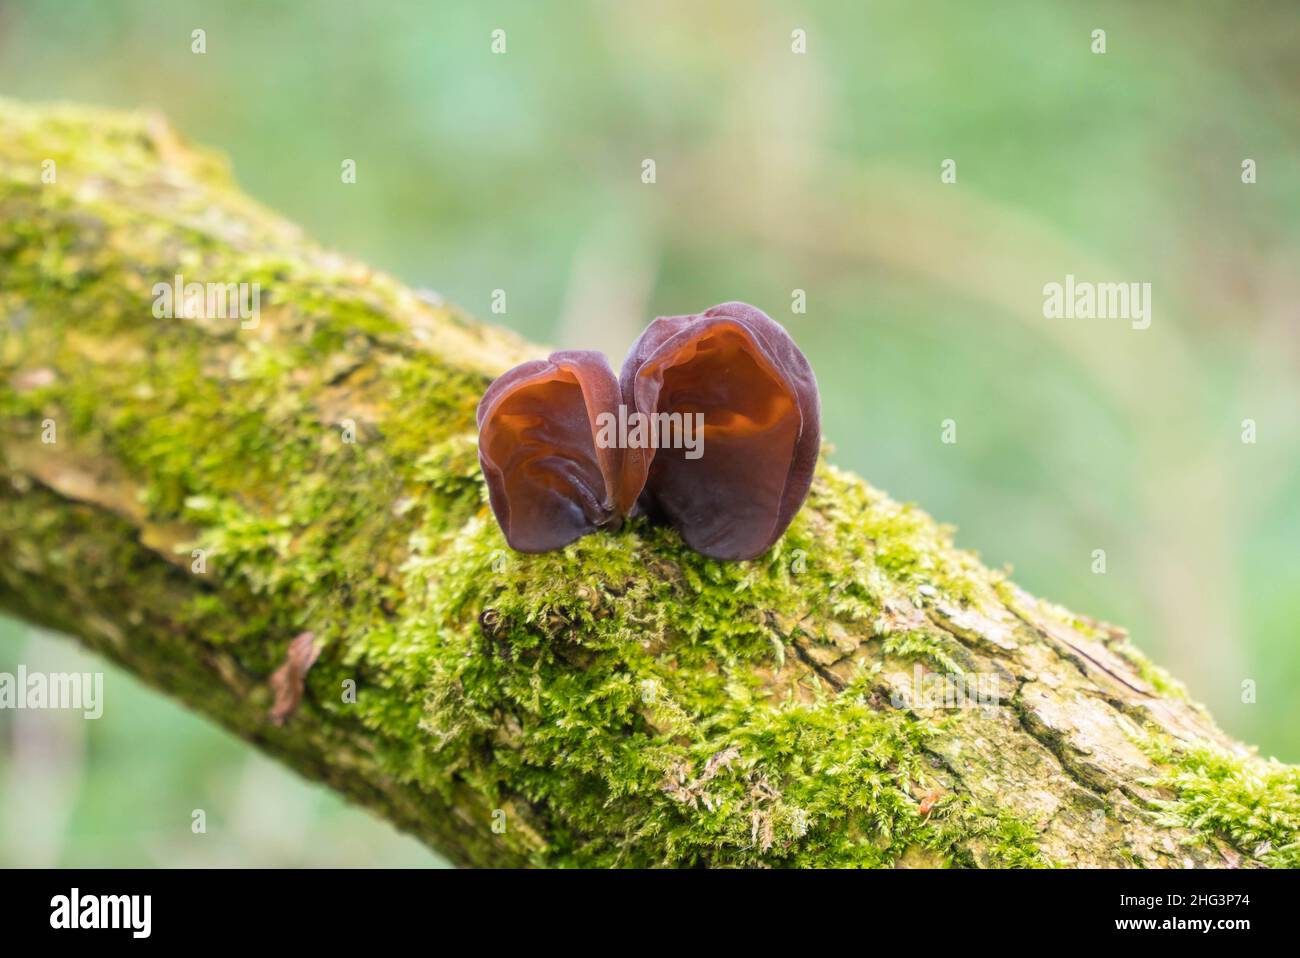 Jelly Ear Fungi Auricularia auricula-judae (Auriculariaceae) also called Jews ear, Wood ear, on moss covered decaying Elder branch. Herefordshire UK. Stock Photo